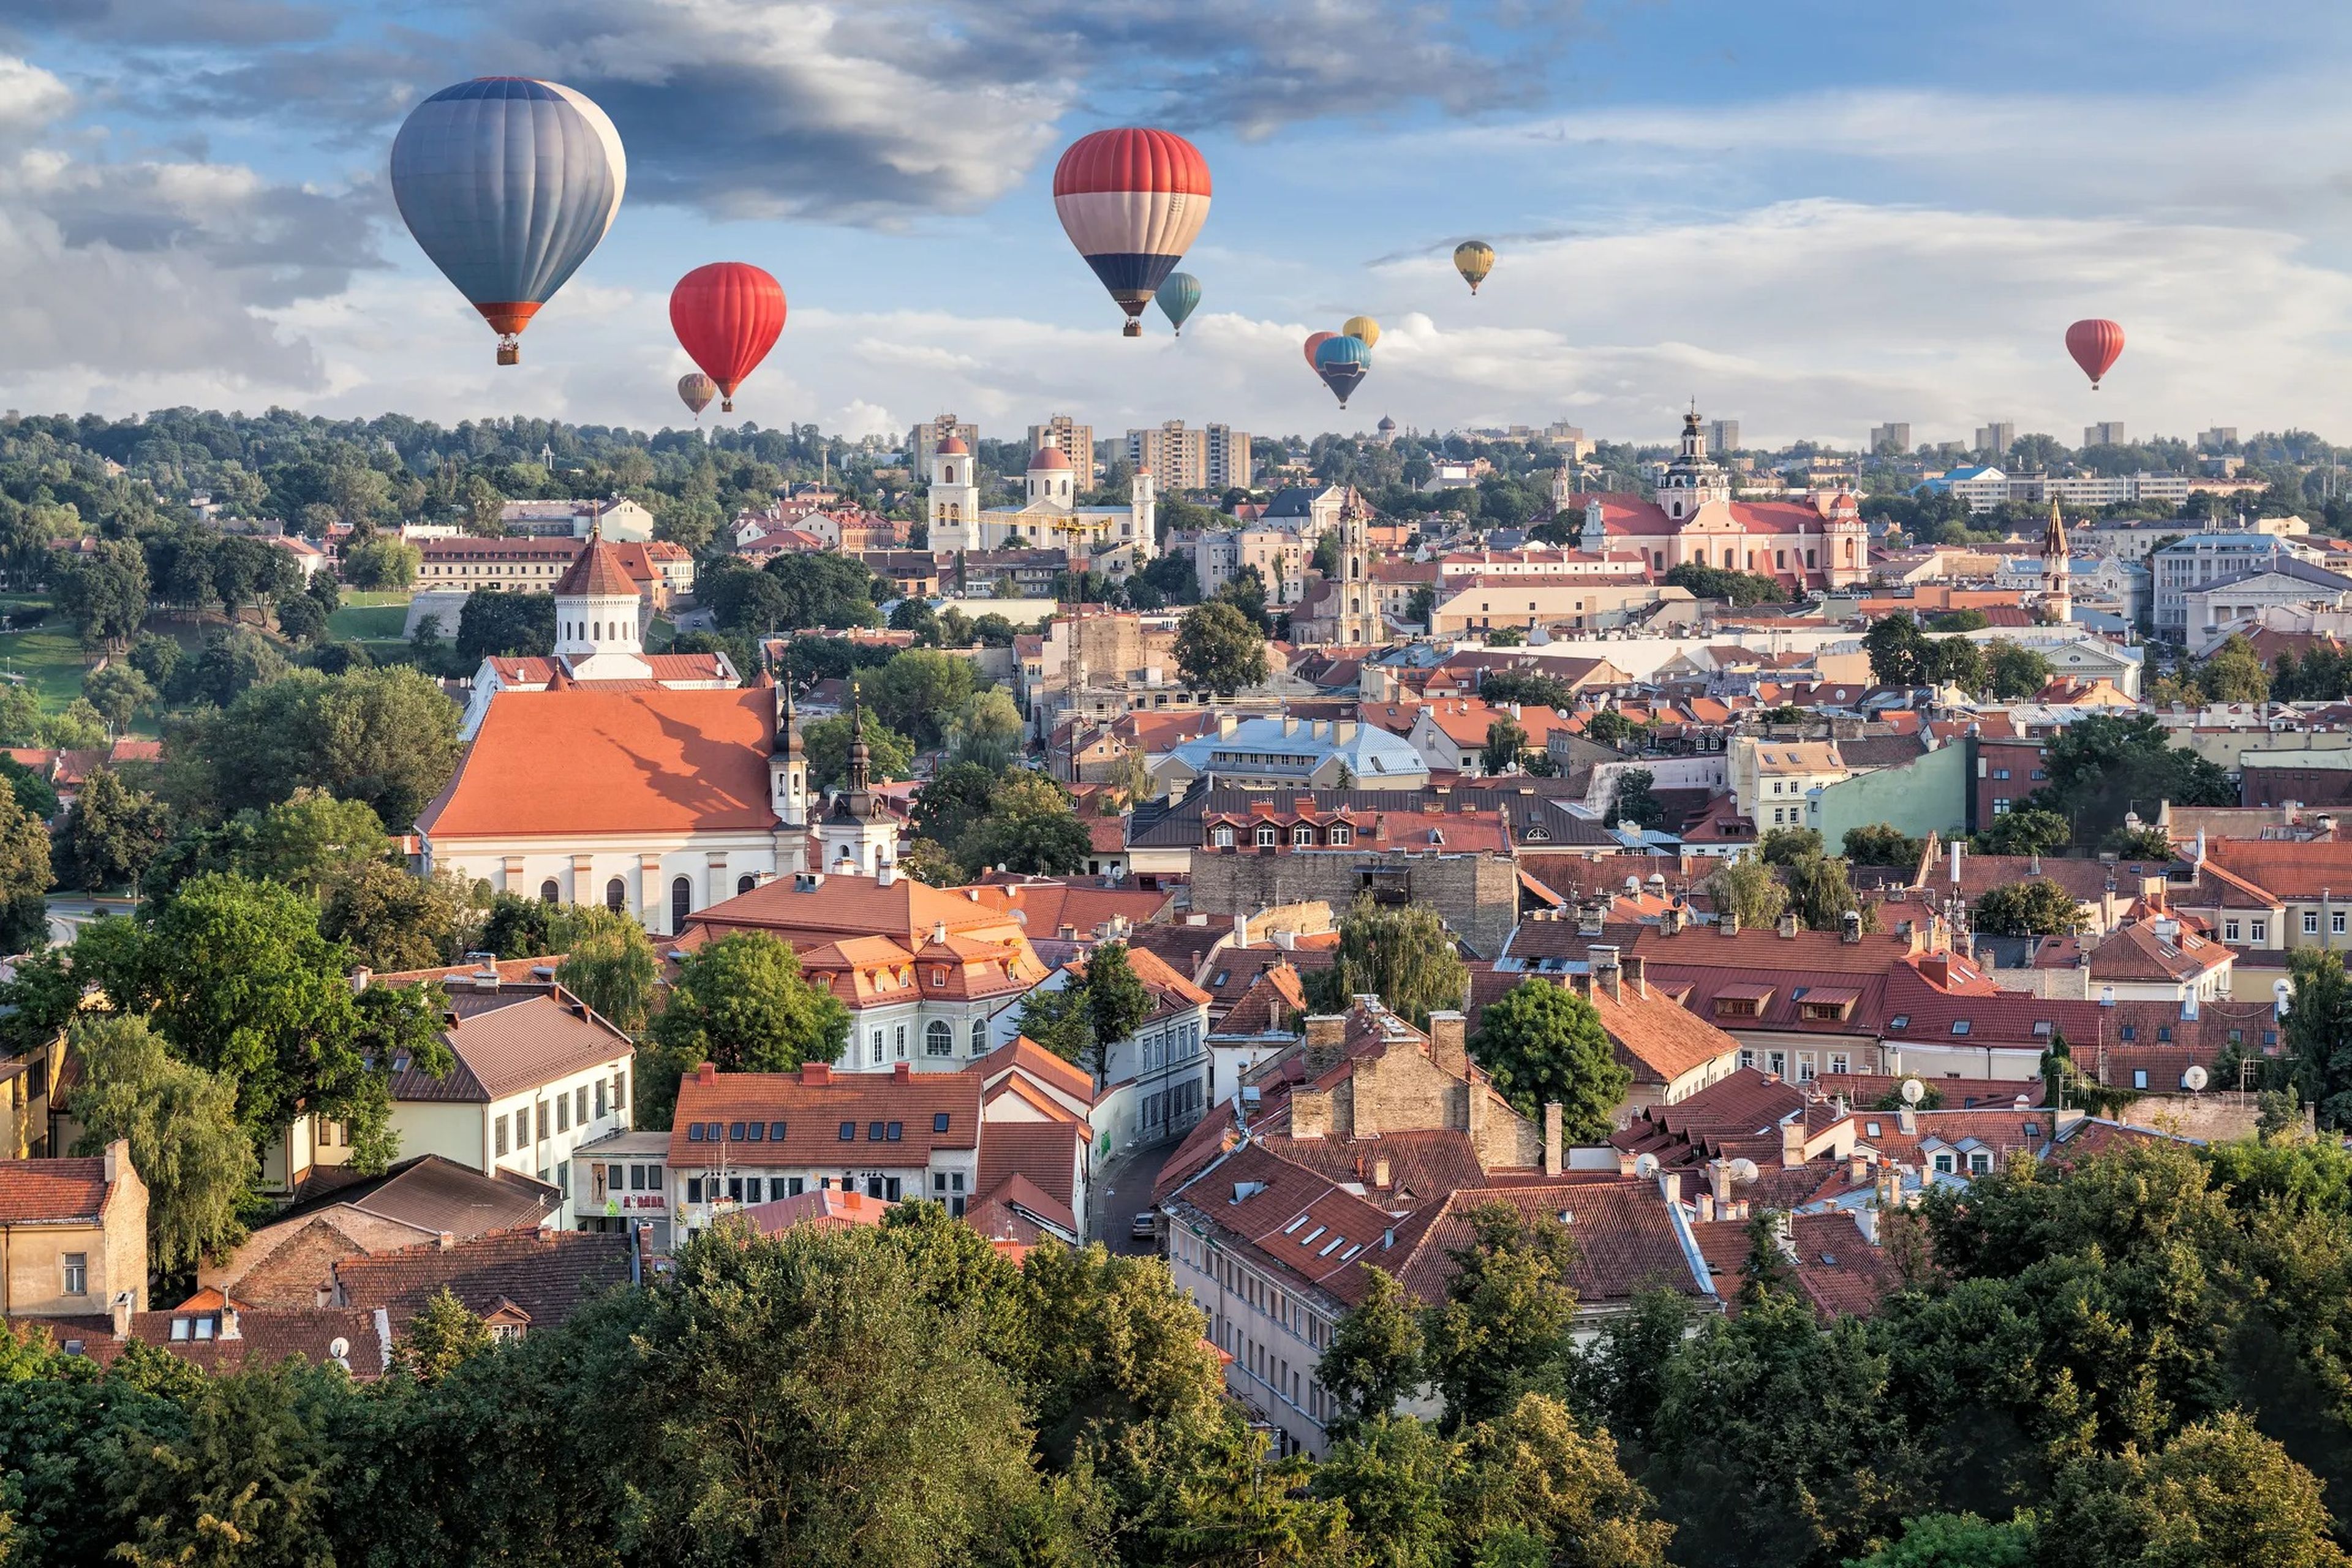 Balloons over Vilnius, the capital of Lithuania.